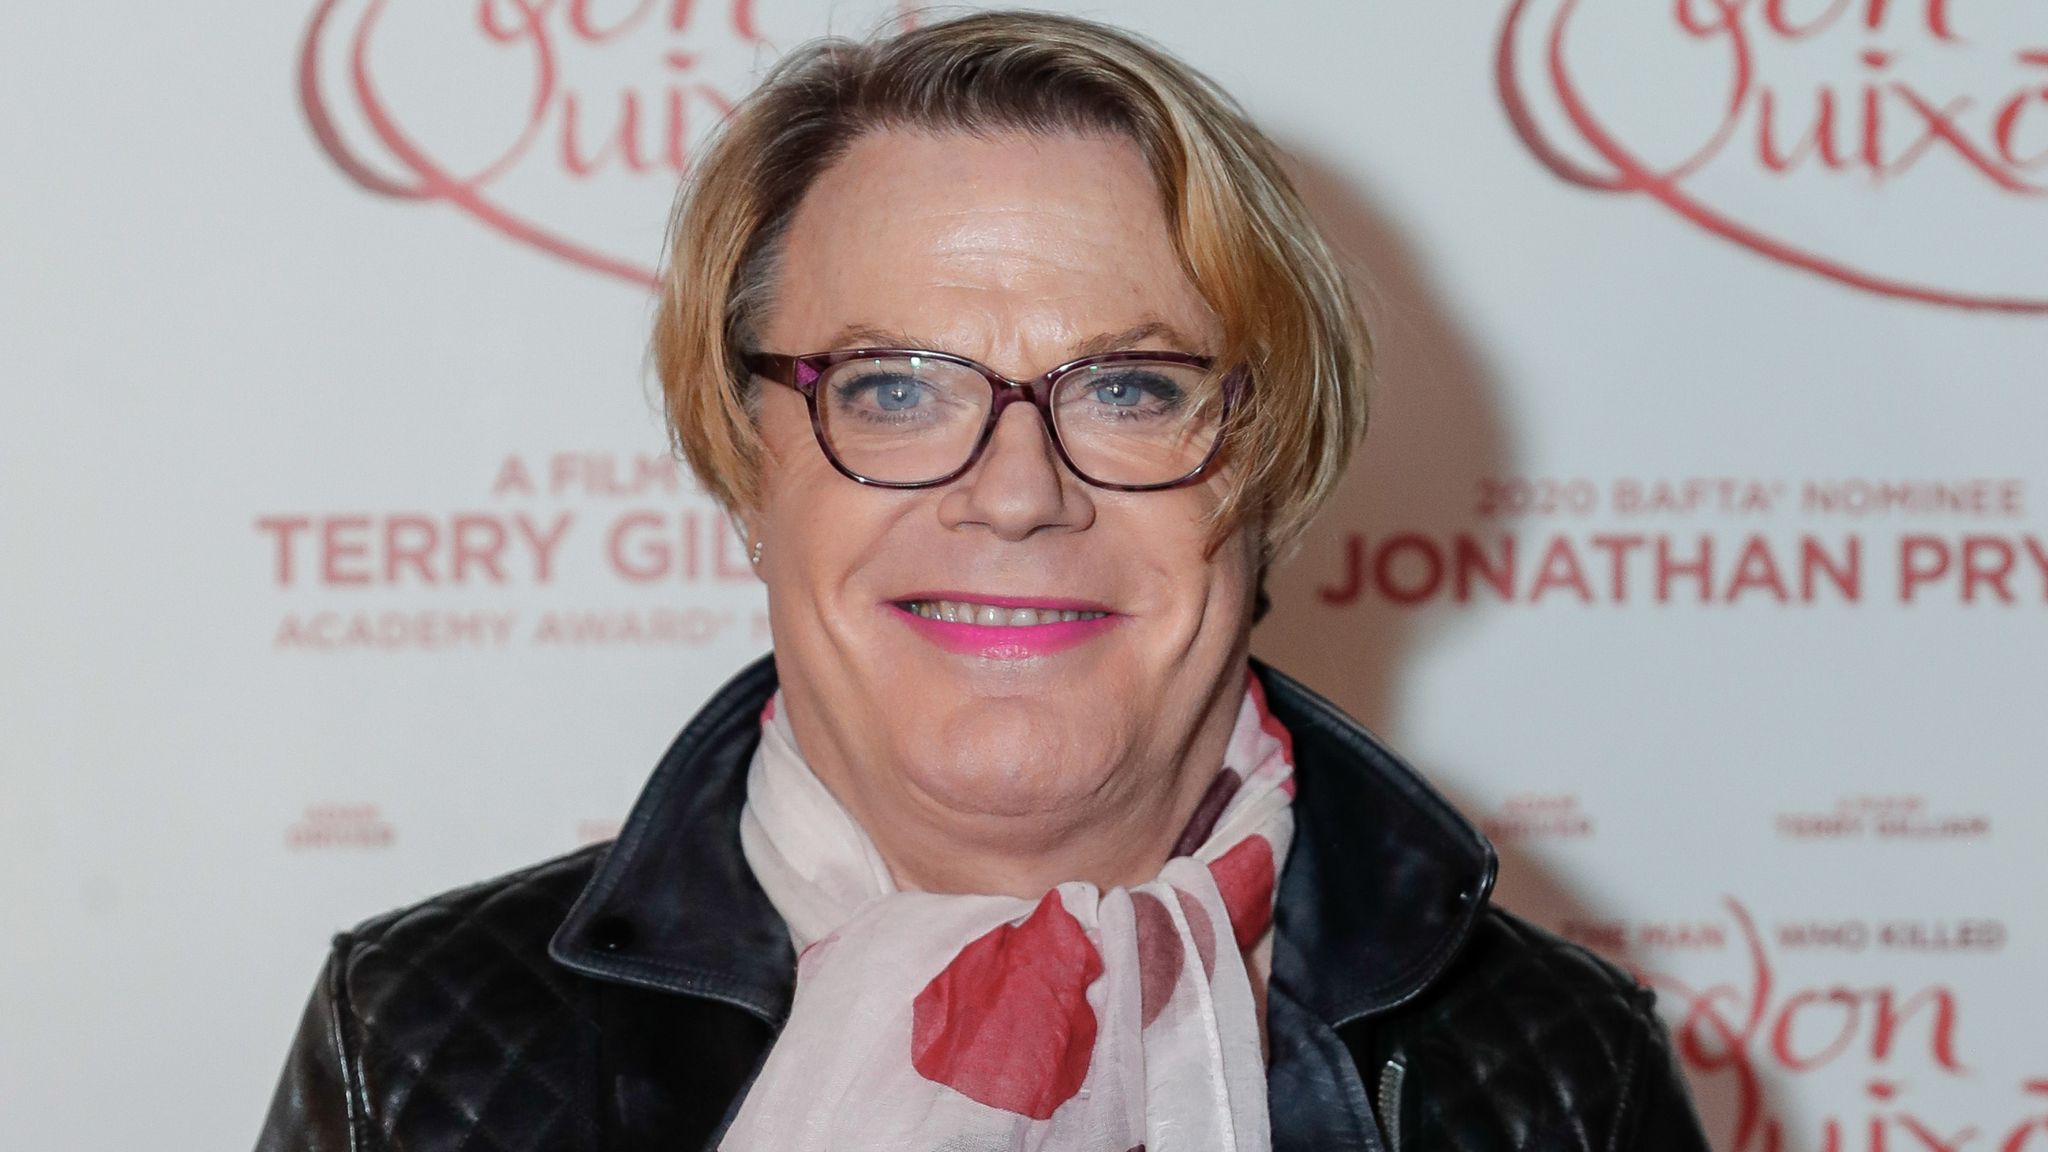 Comedian Eddie Izzard praised for using pronouns 'she' and 'her